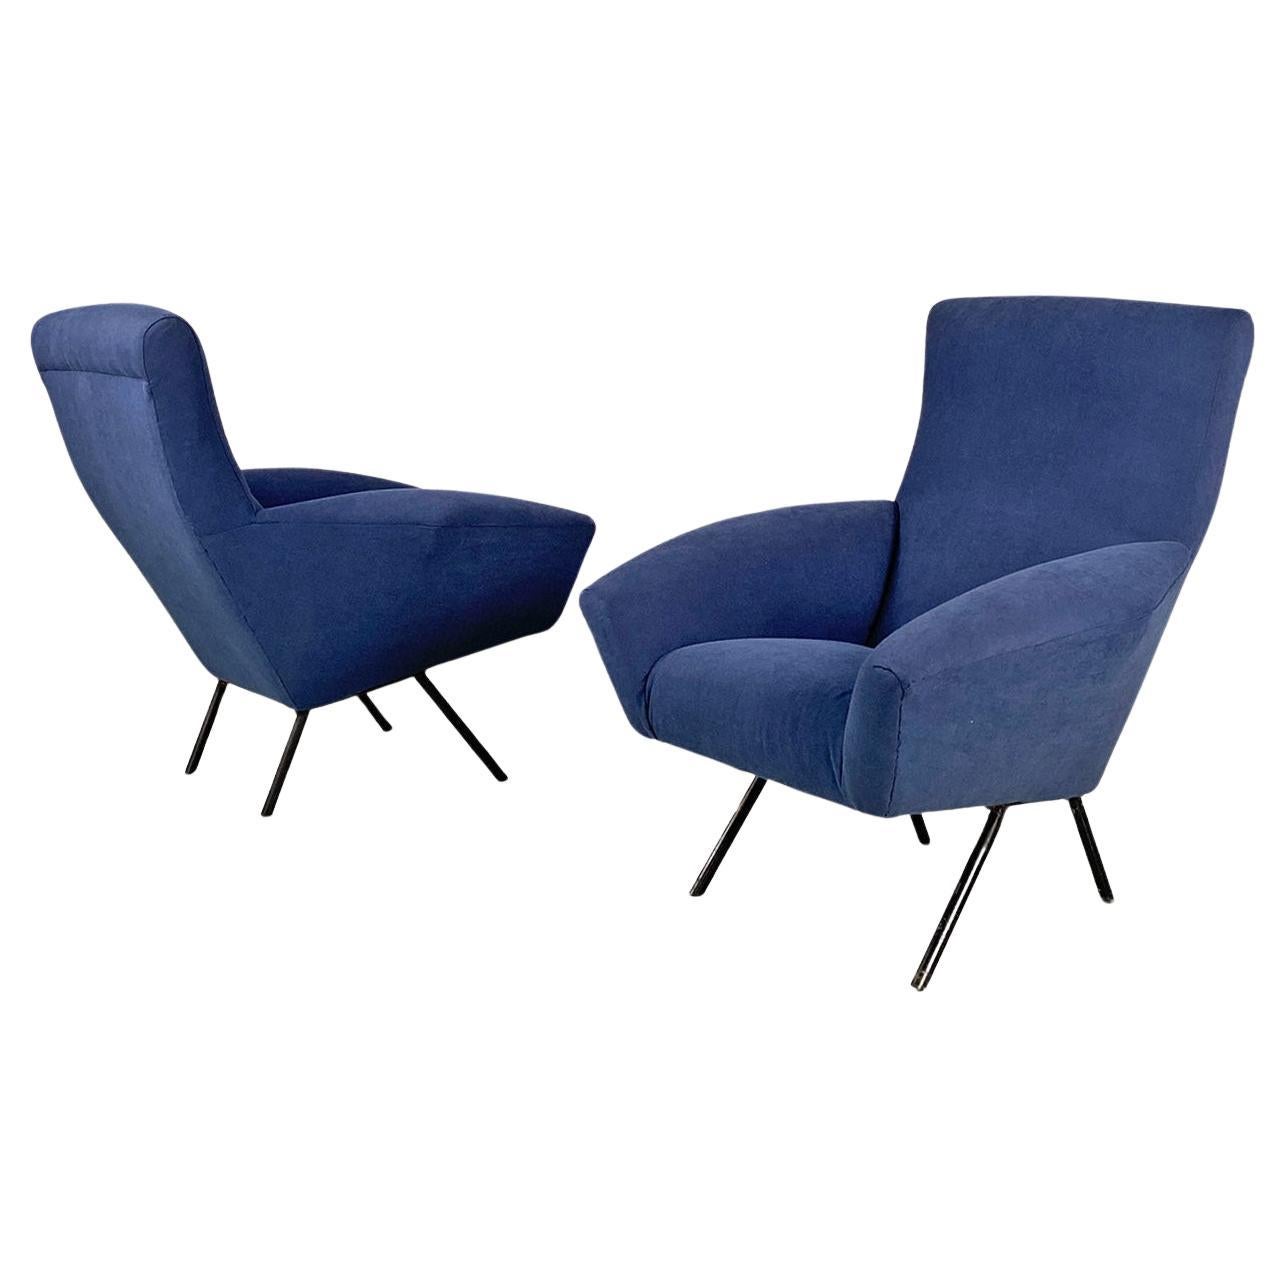 Italian mid-century modern blue fabric and black metal armchairs, 1960s For Sale